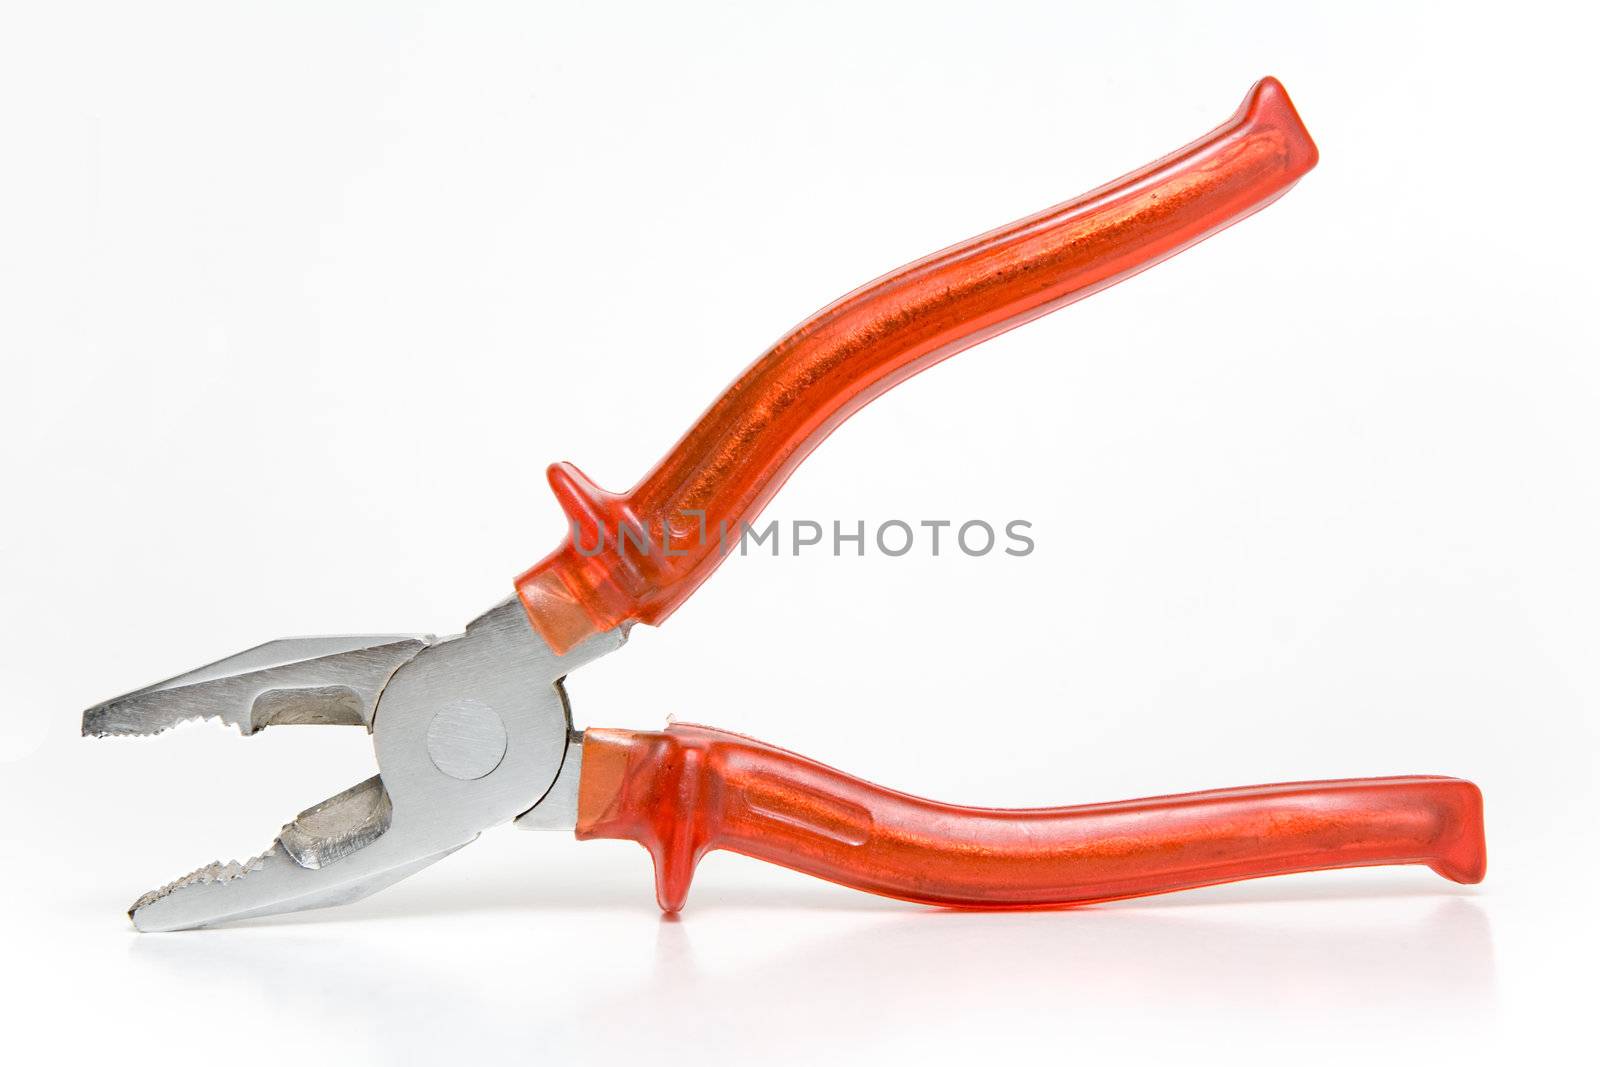 Tongs with red handles on a white background